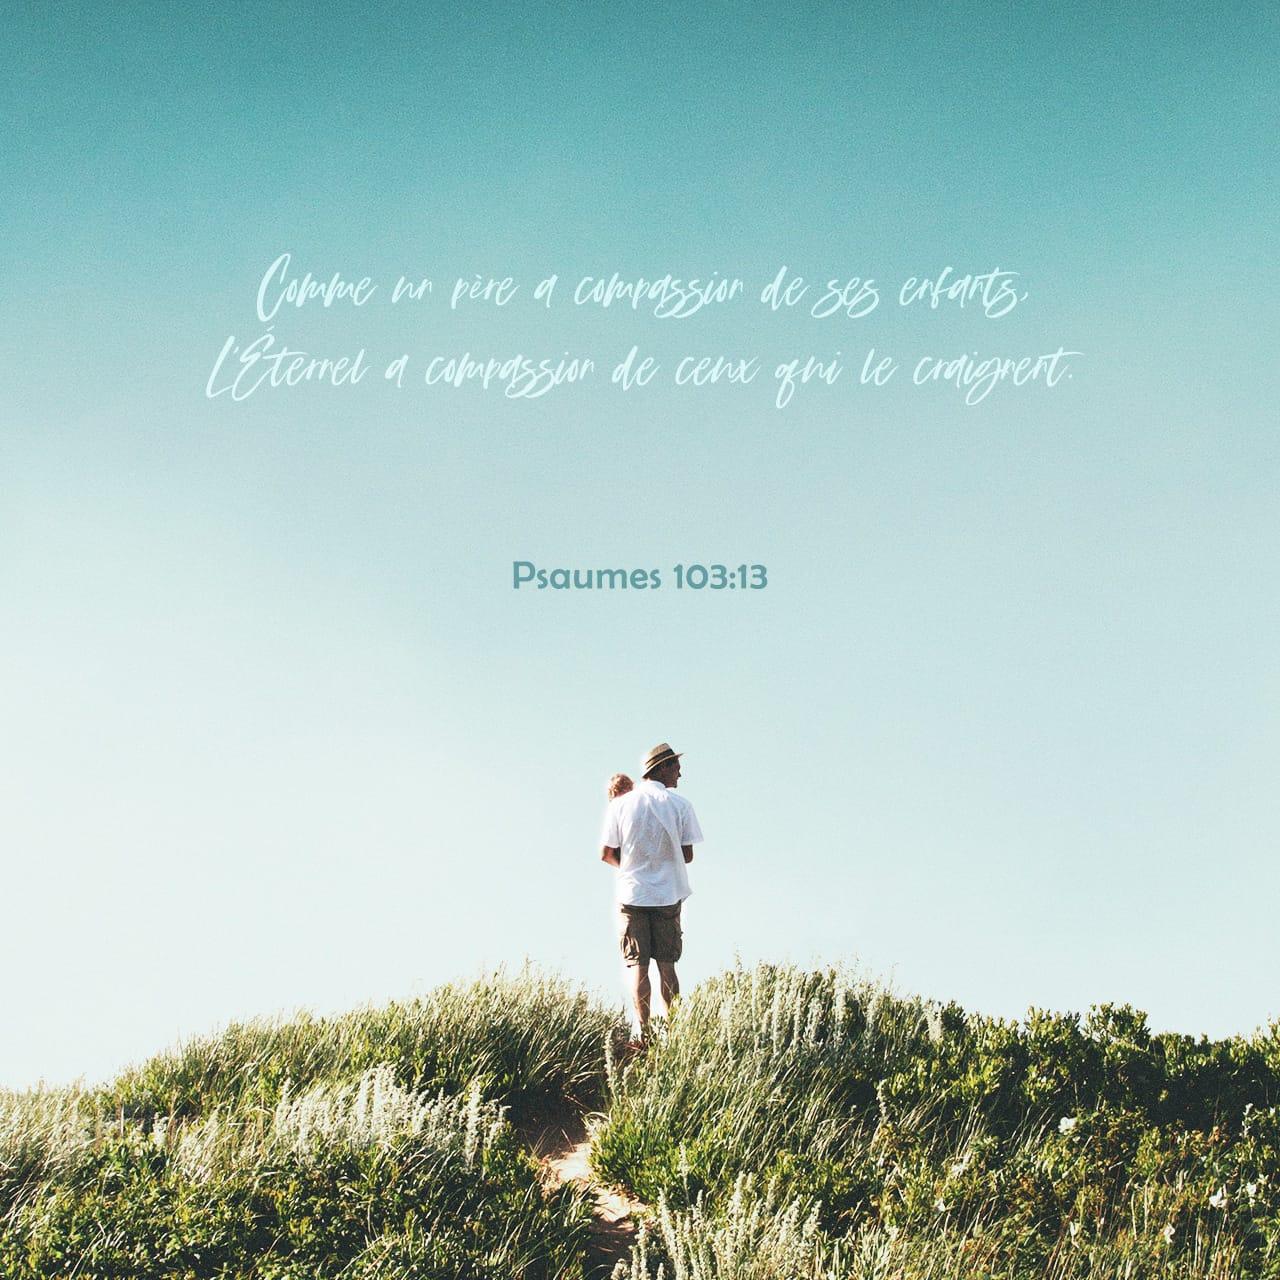 Bible Verse of the Day - day 85 - image 36192 (Psaumes 103:13)